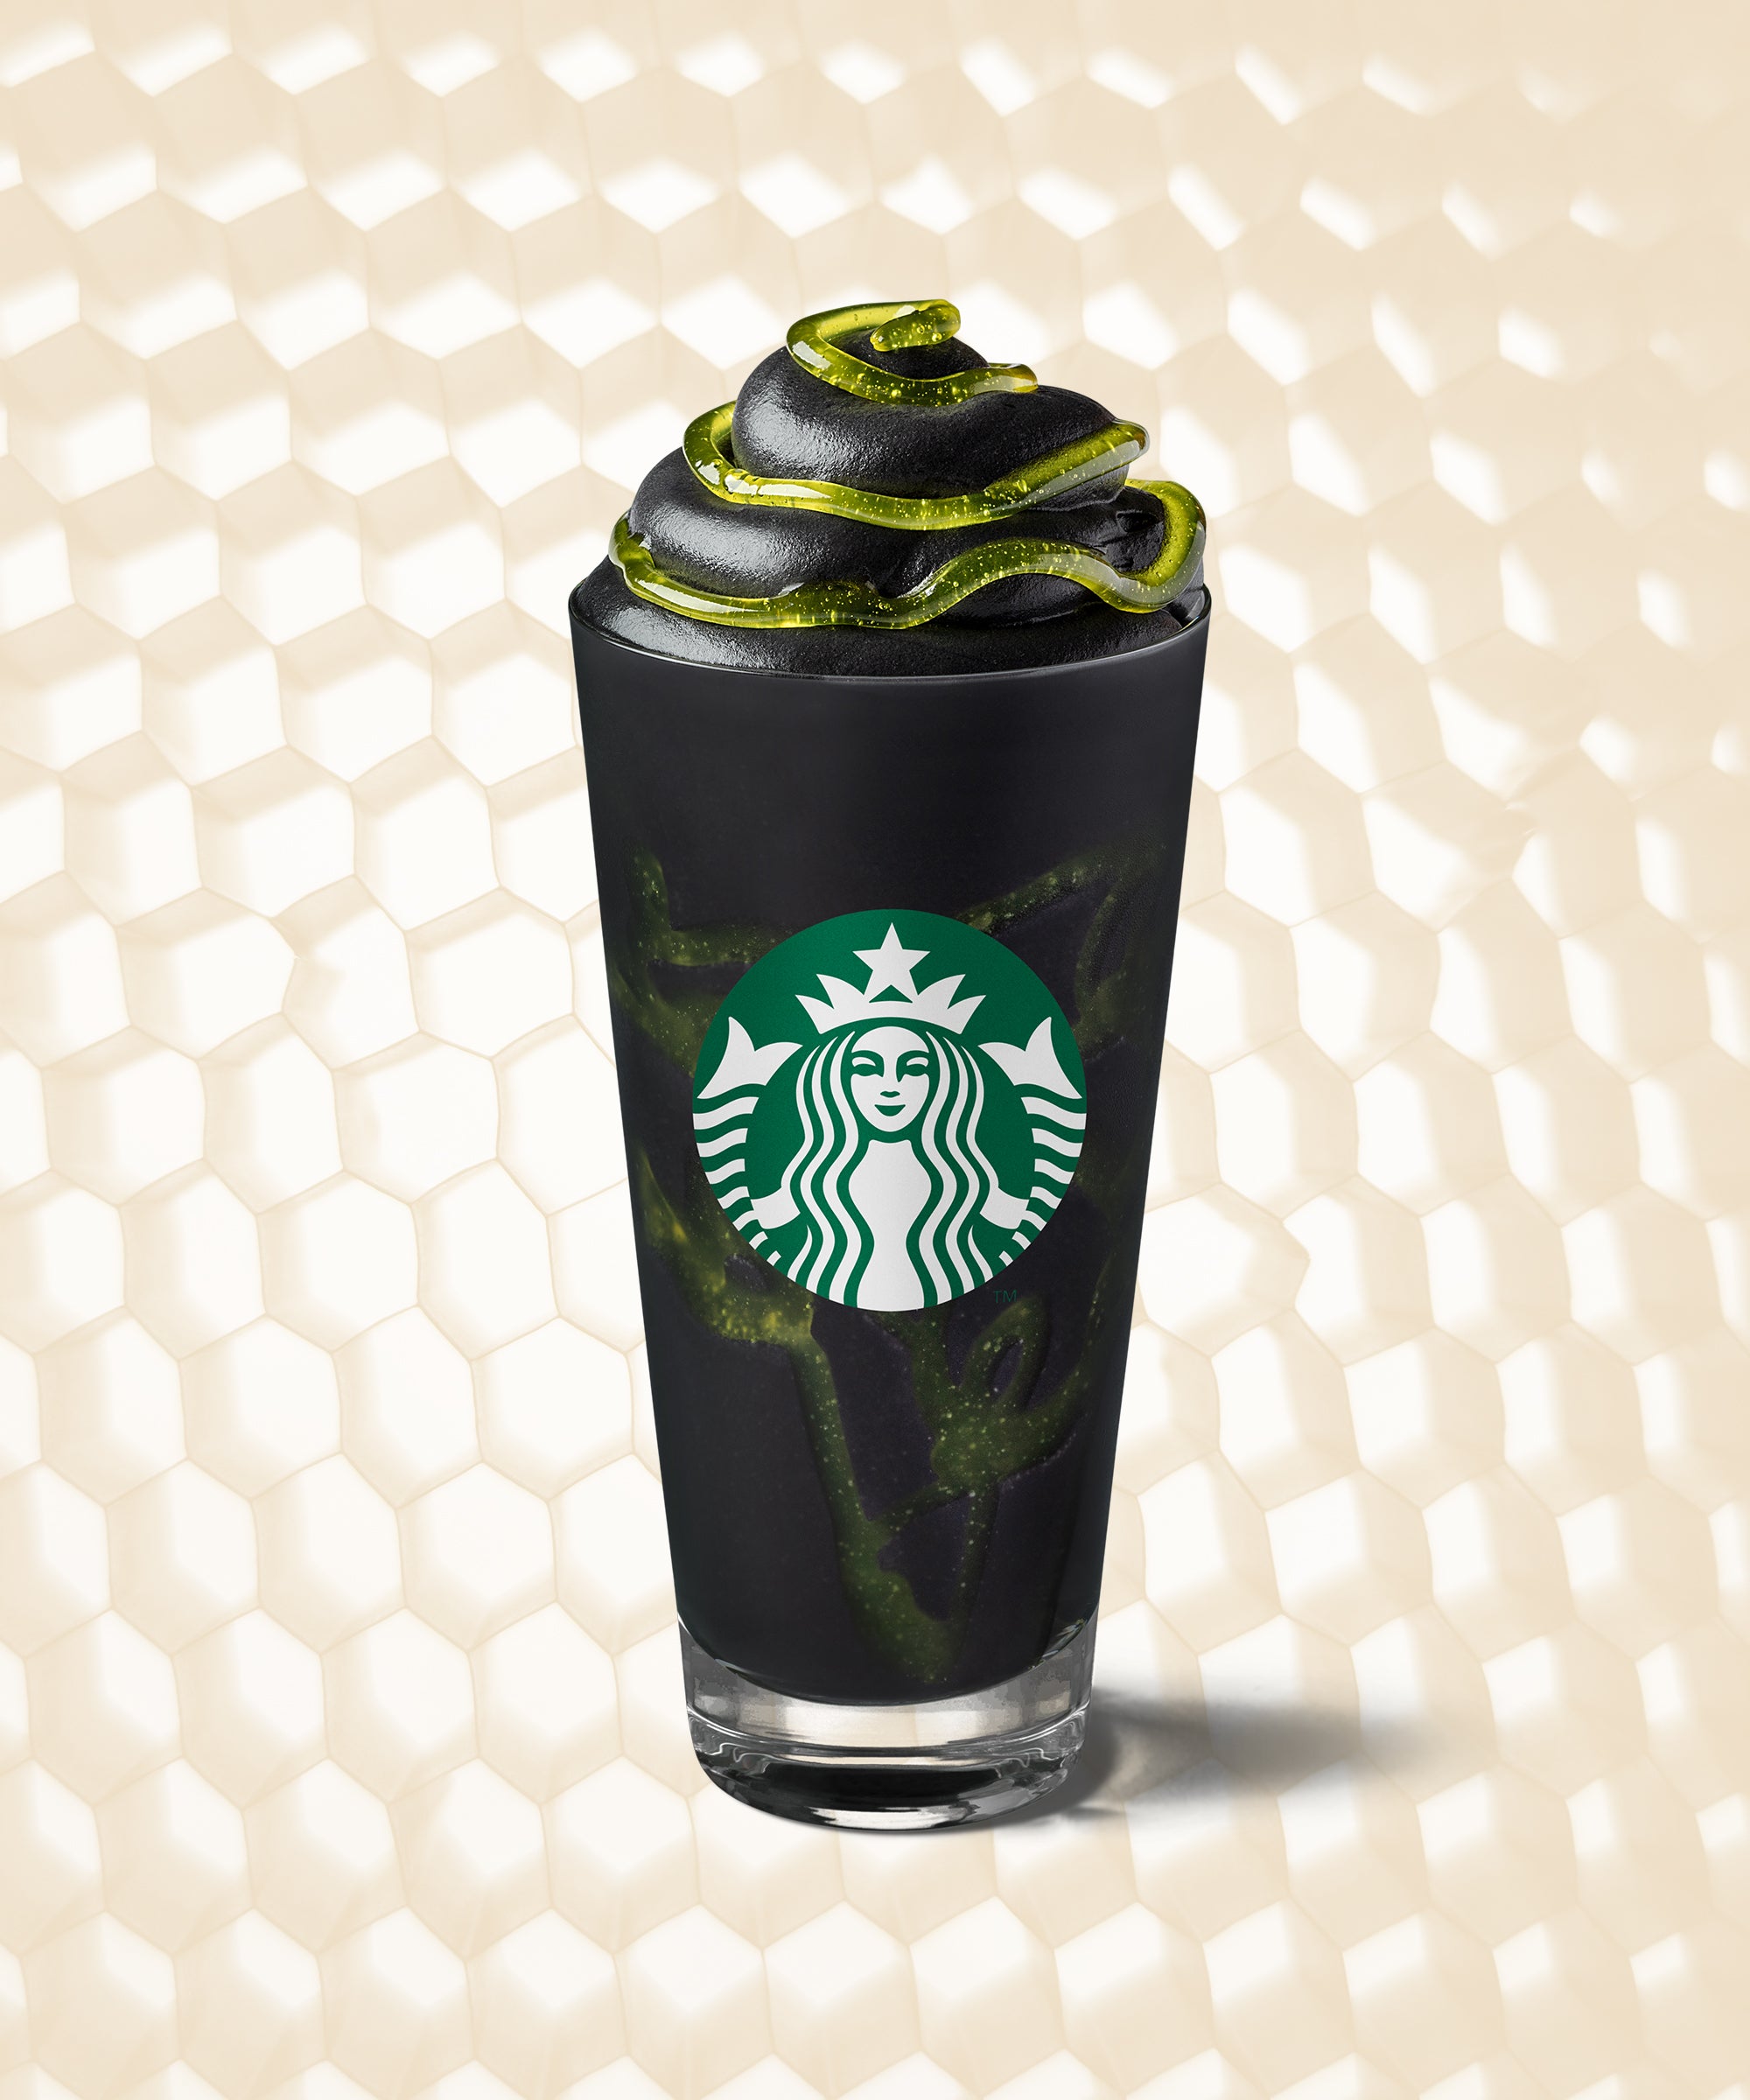 Flipboard Starbucks Has a New Phantom Frappuccino That’s All Black and